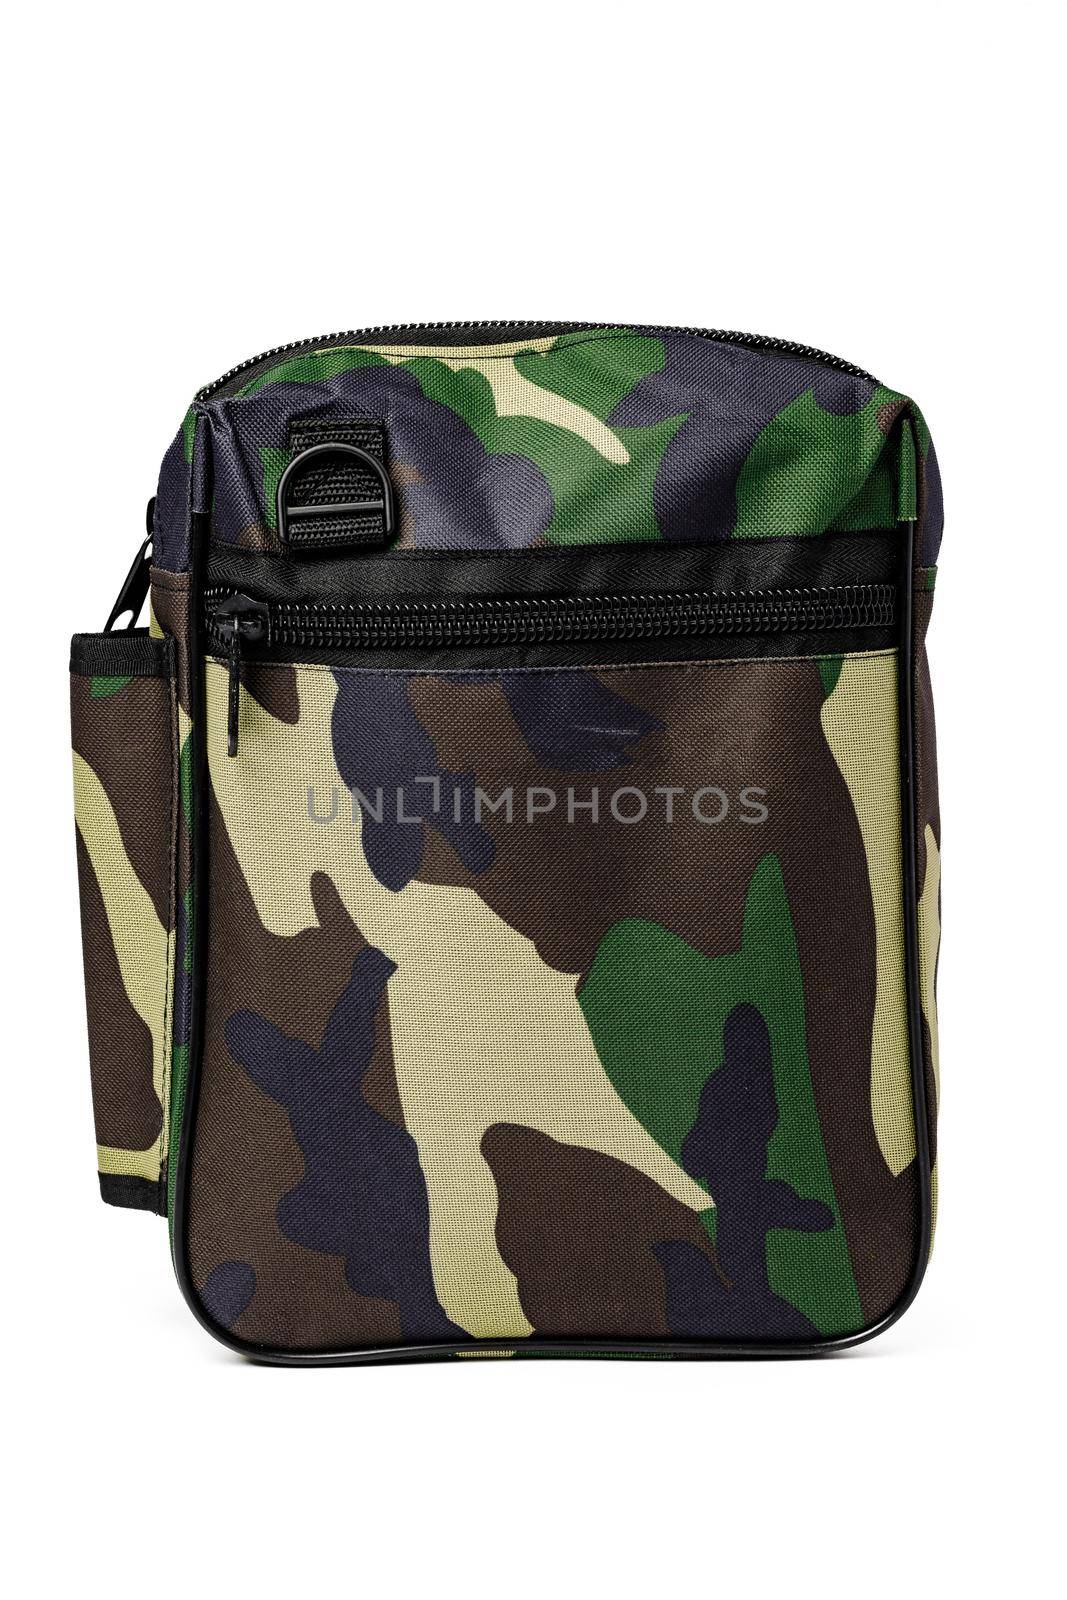 Travel military bag isolated on white background close up